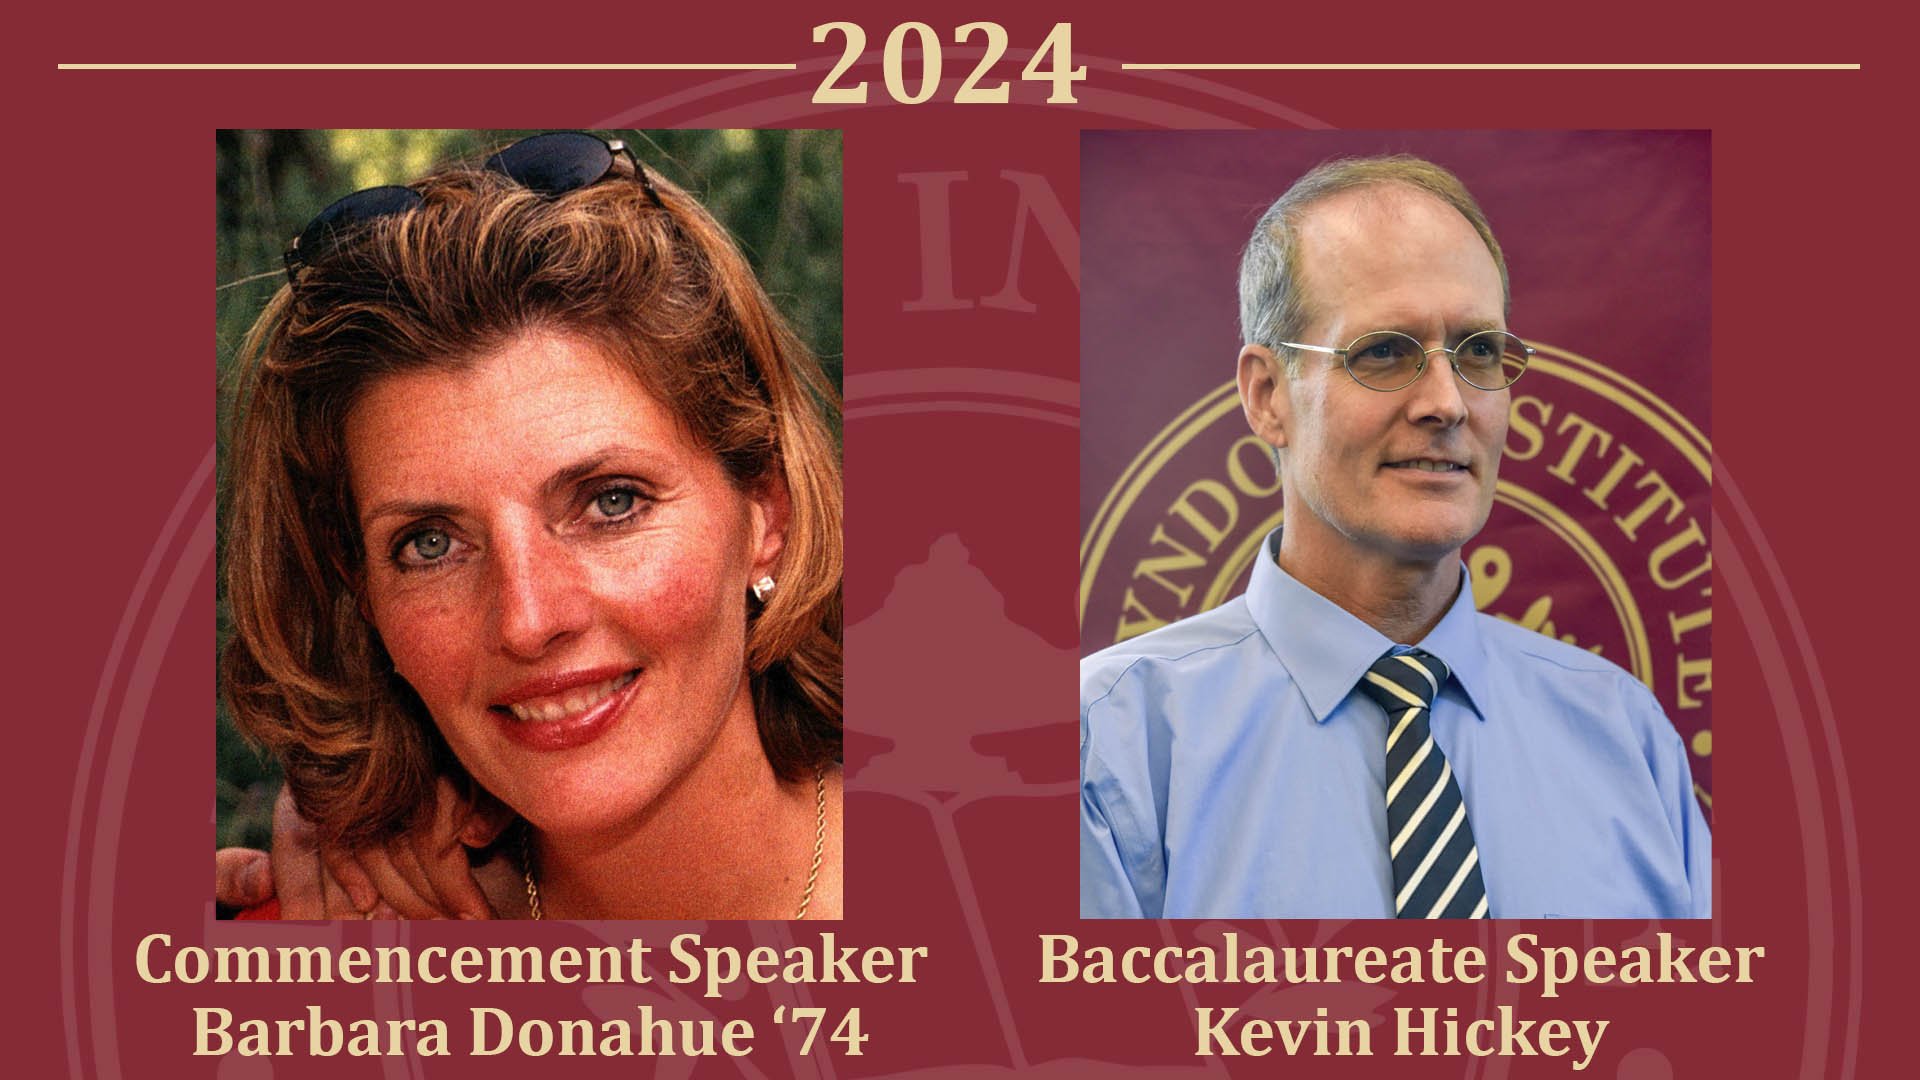 Image of Barbara Donahue '74, Commencement Speaker, and Kevin Hickey, Baccalaureate speaker. 